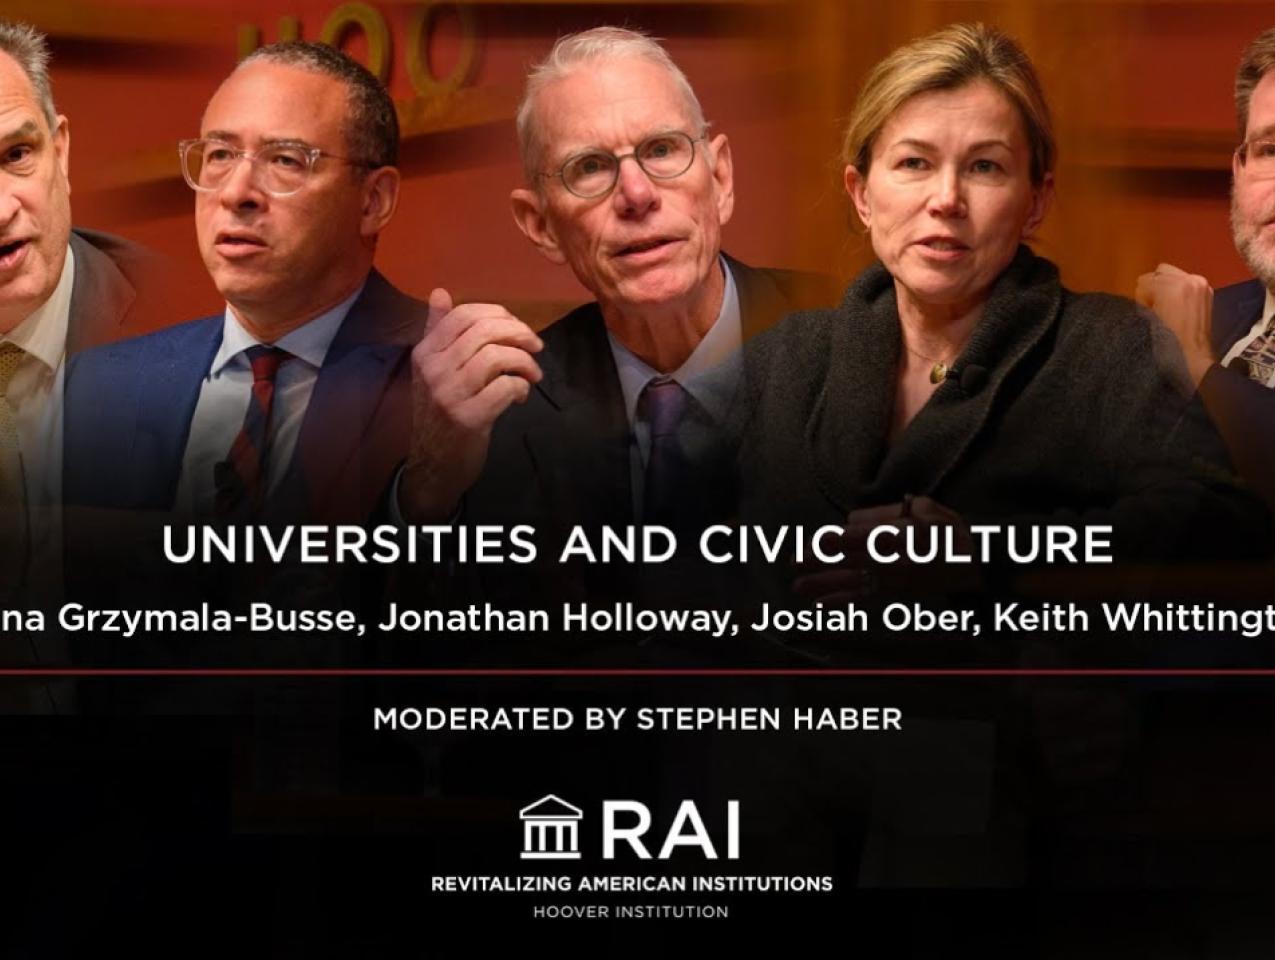 Universities and Civic Culture